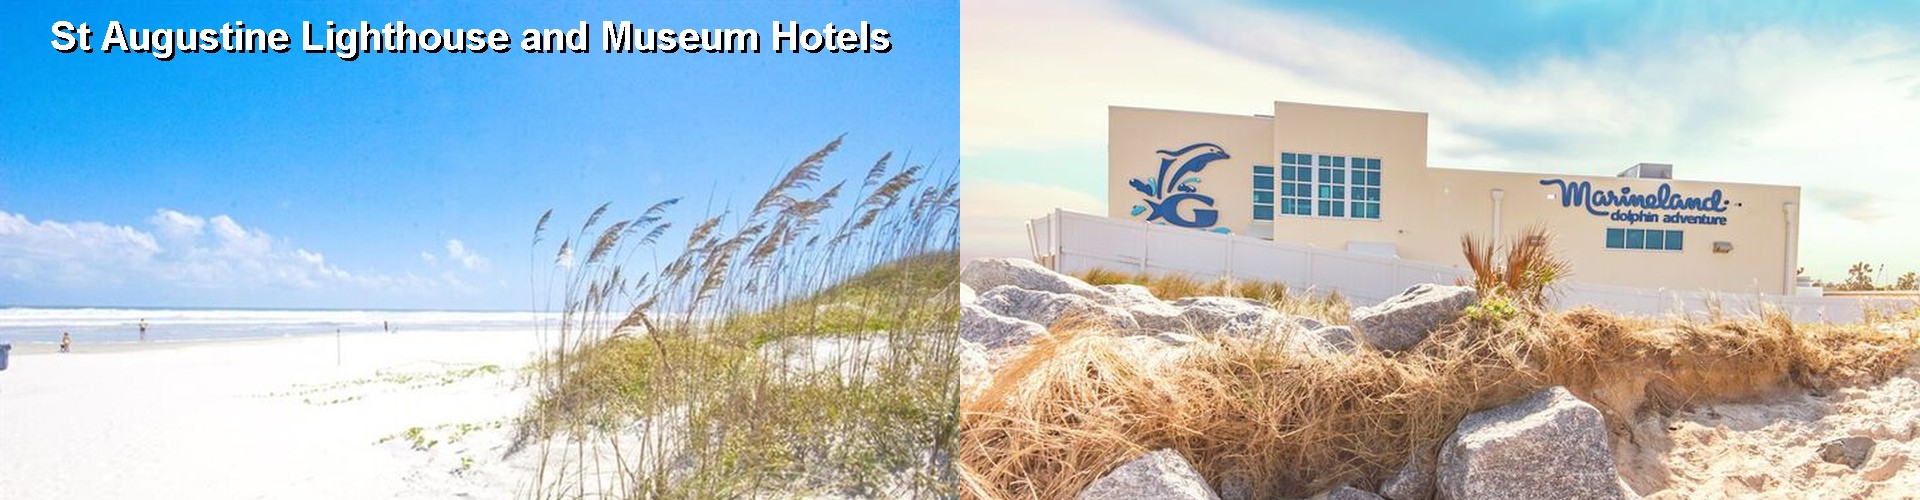 5 Best Hotels near St Augustine Lighthouse and Museum